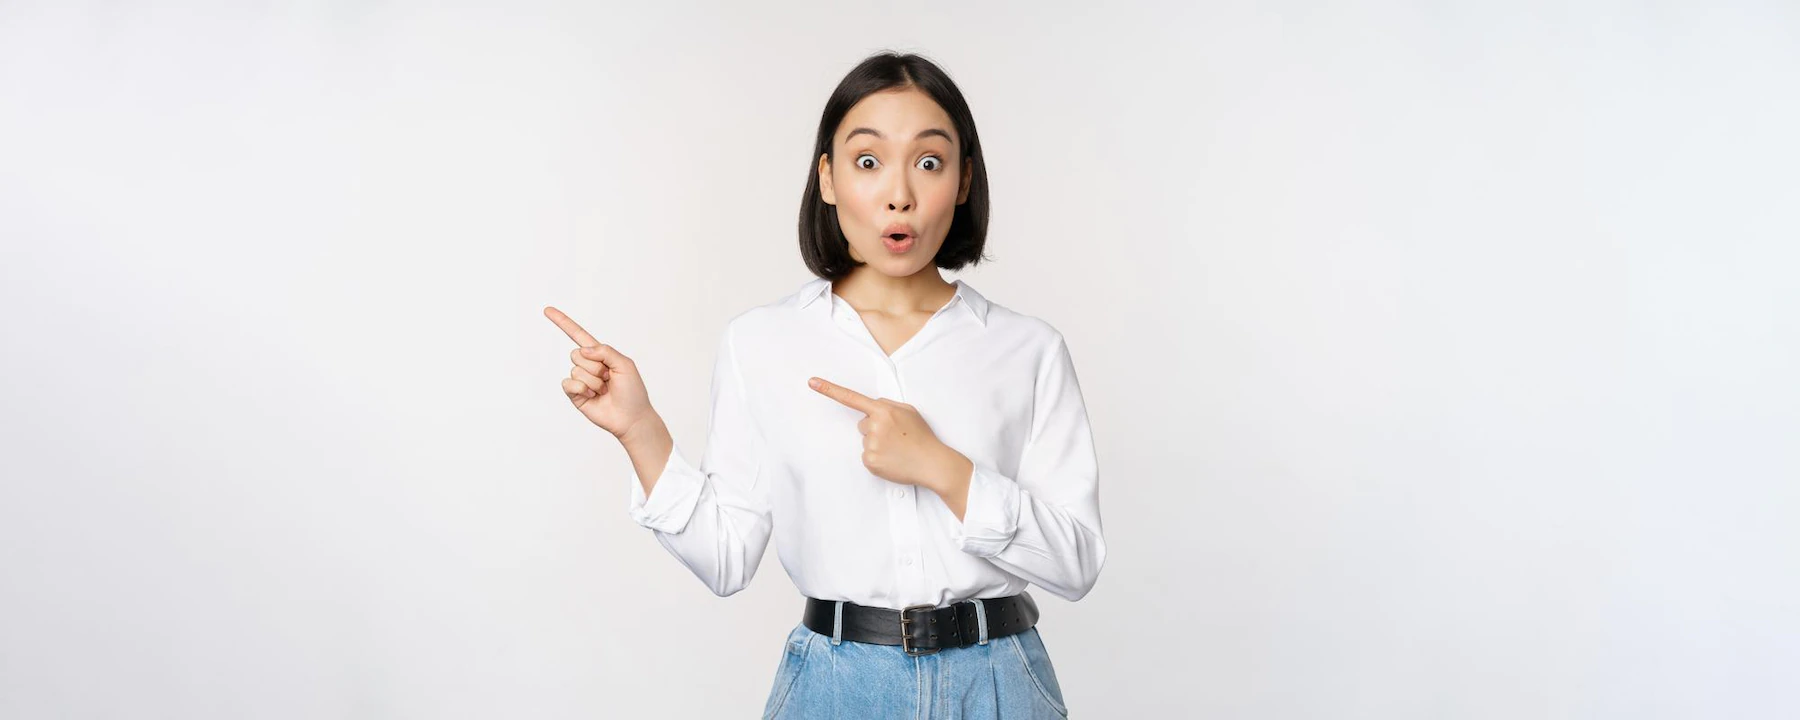 portrait of excited young asian woman office lady pointing fingers left at discount showing sale banner standing over white background 1258 98640